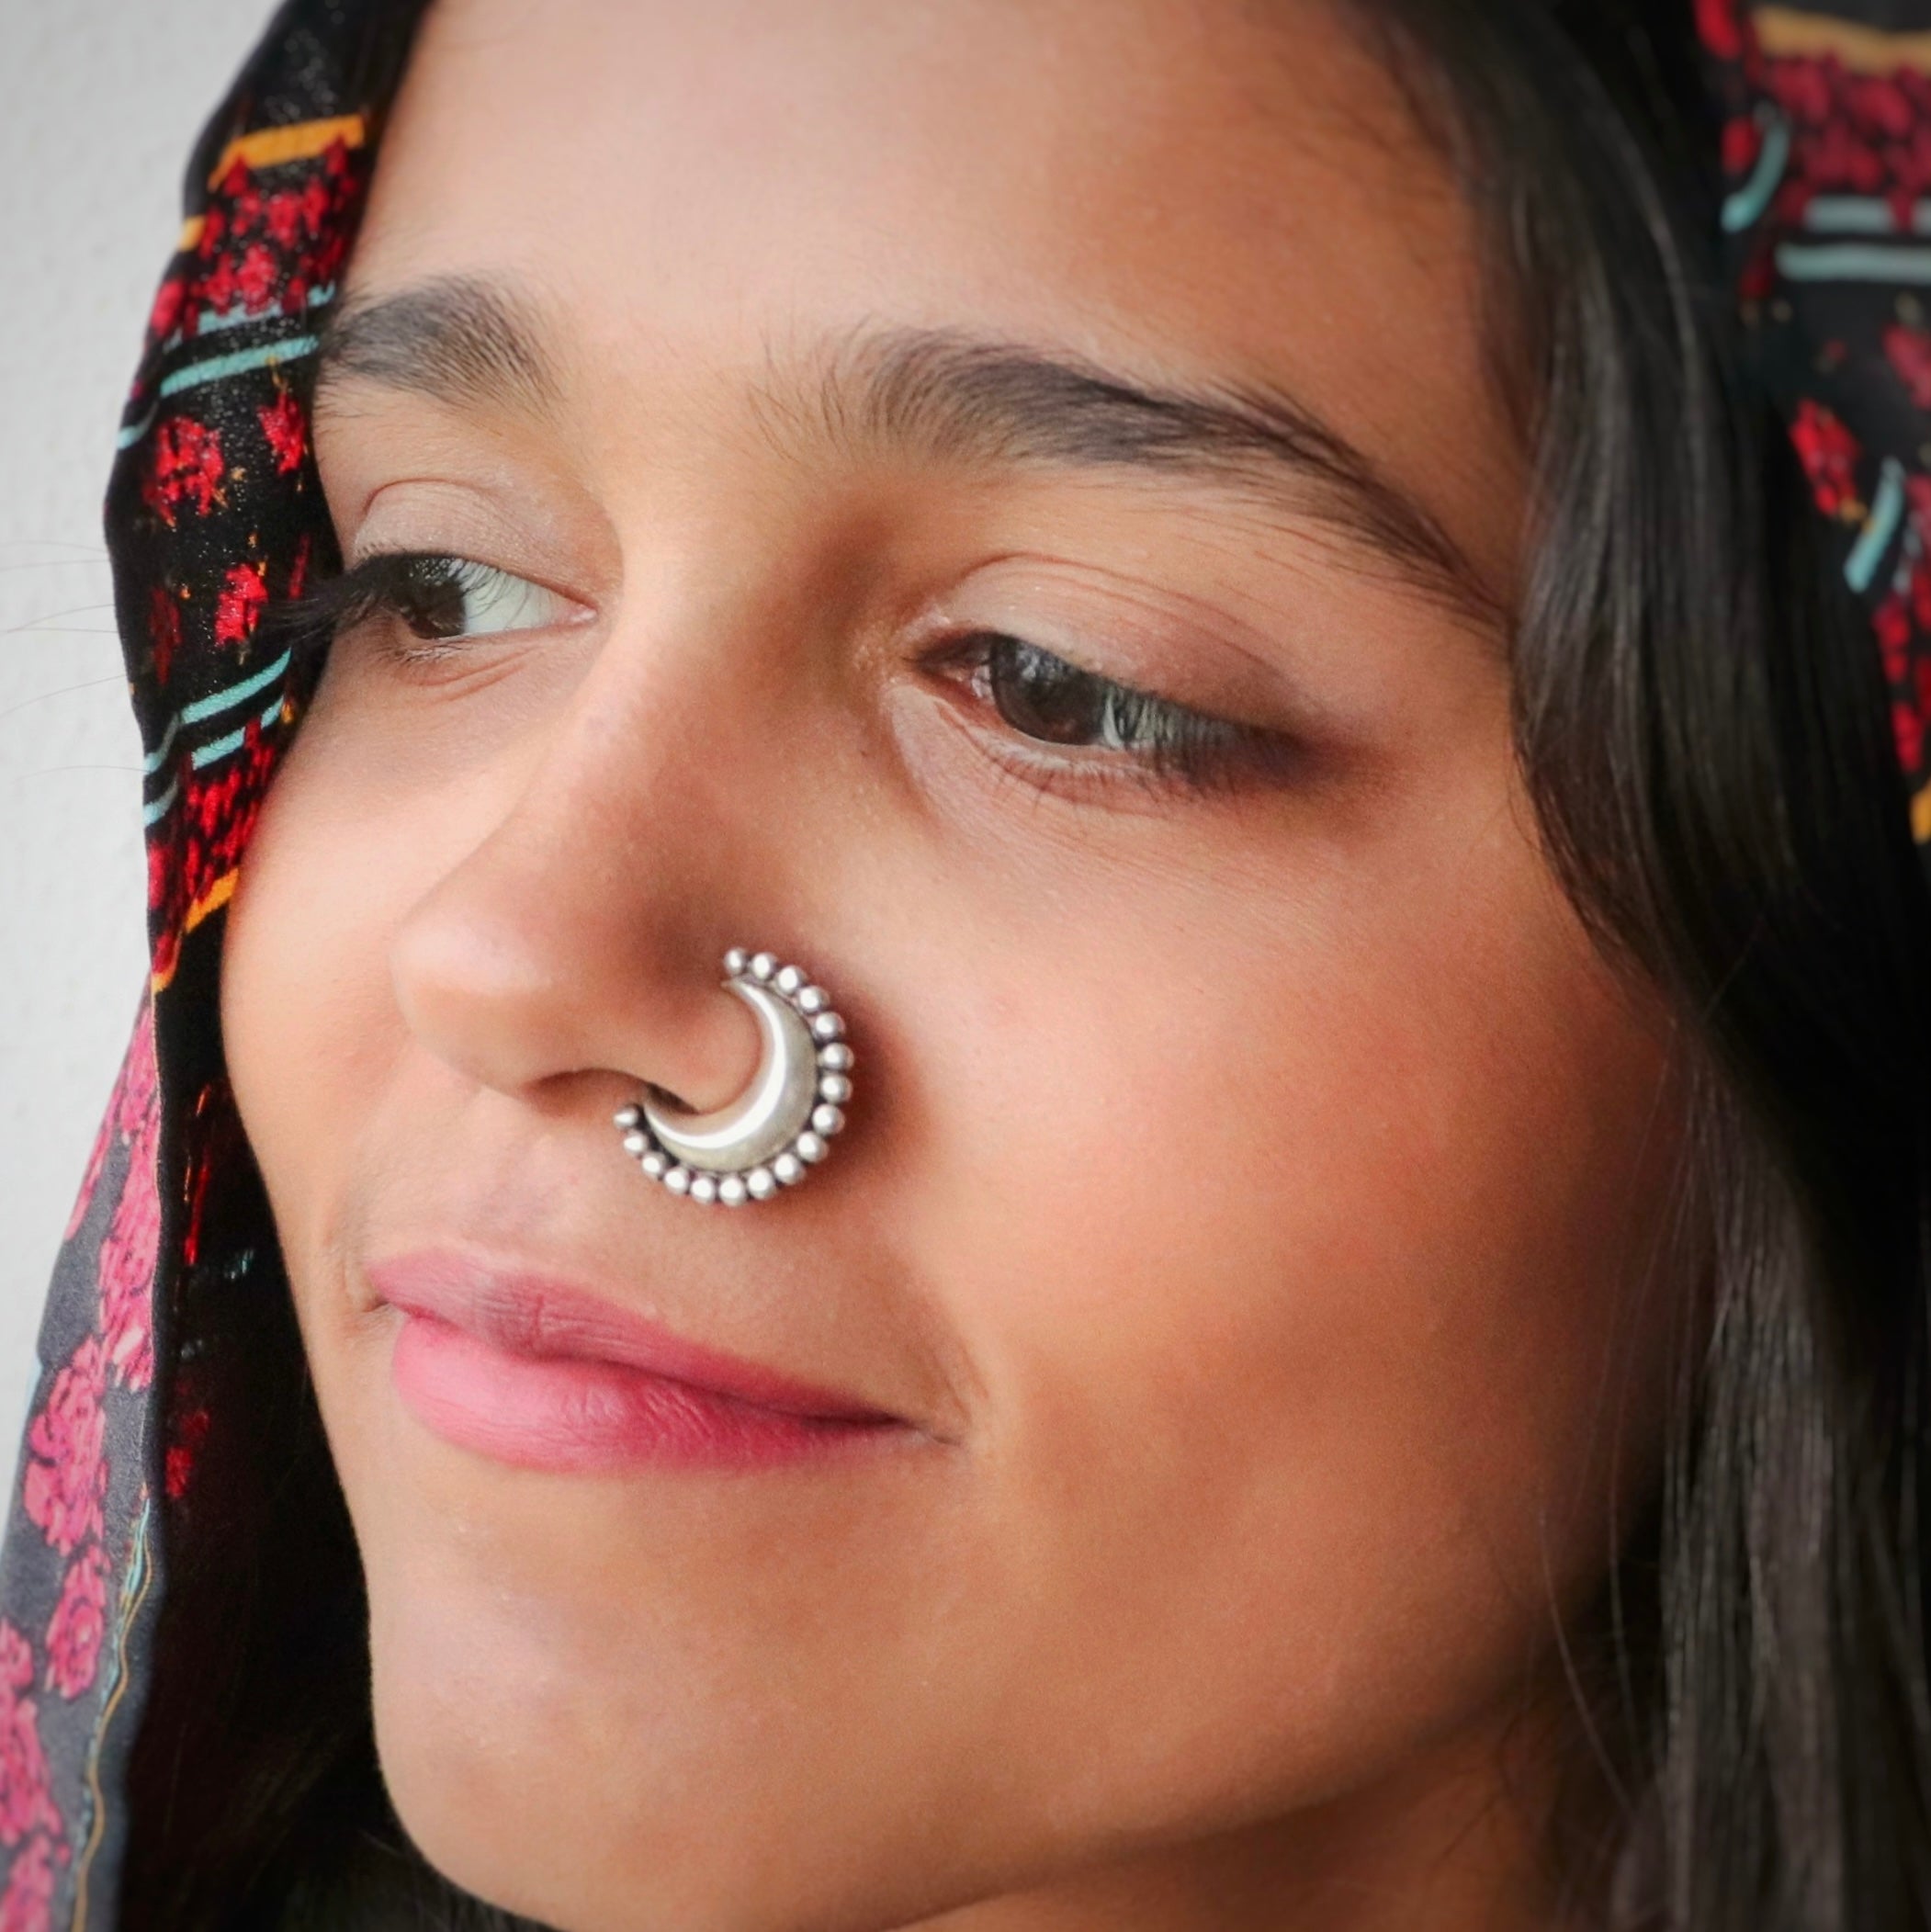 Wedding - Nose Rings - Collection of Indian Dresses, Accessories & Clothing  in Ethnic Fashion